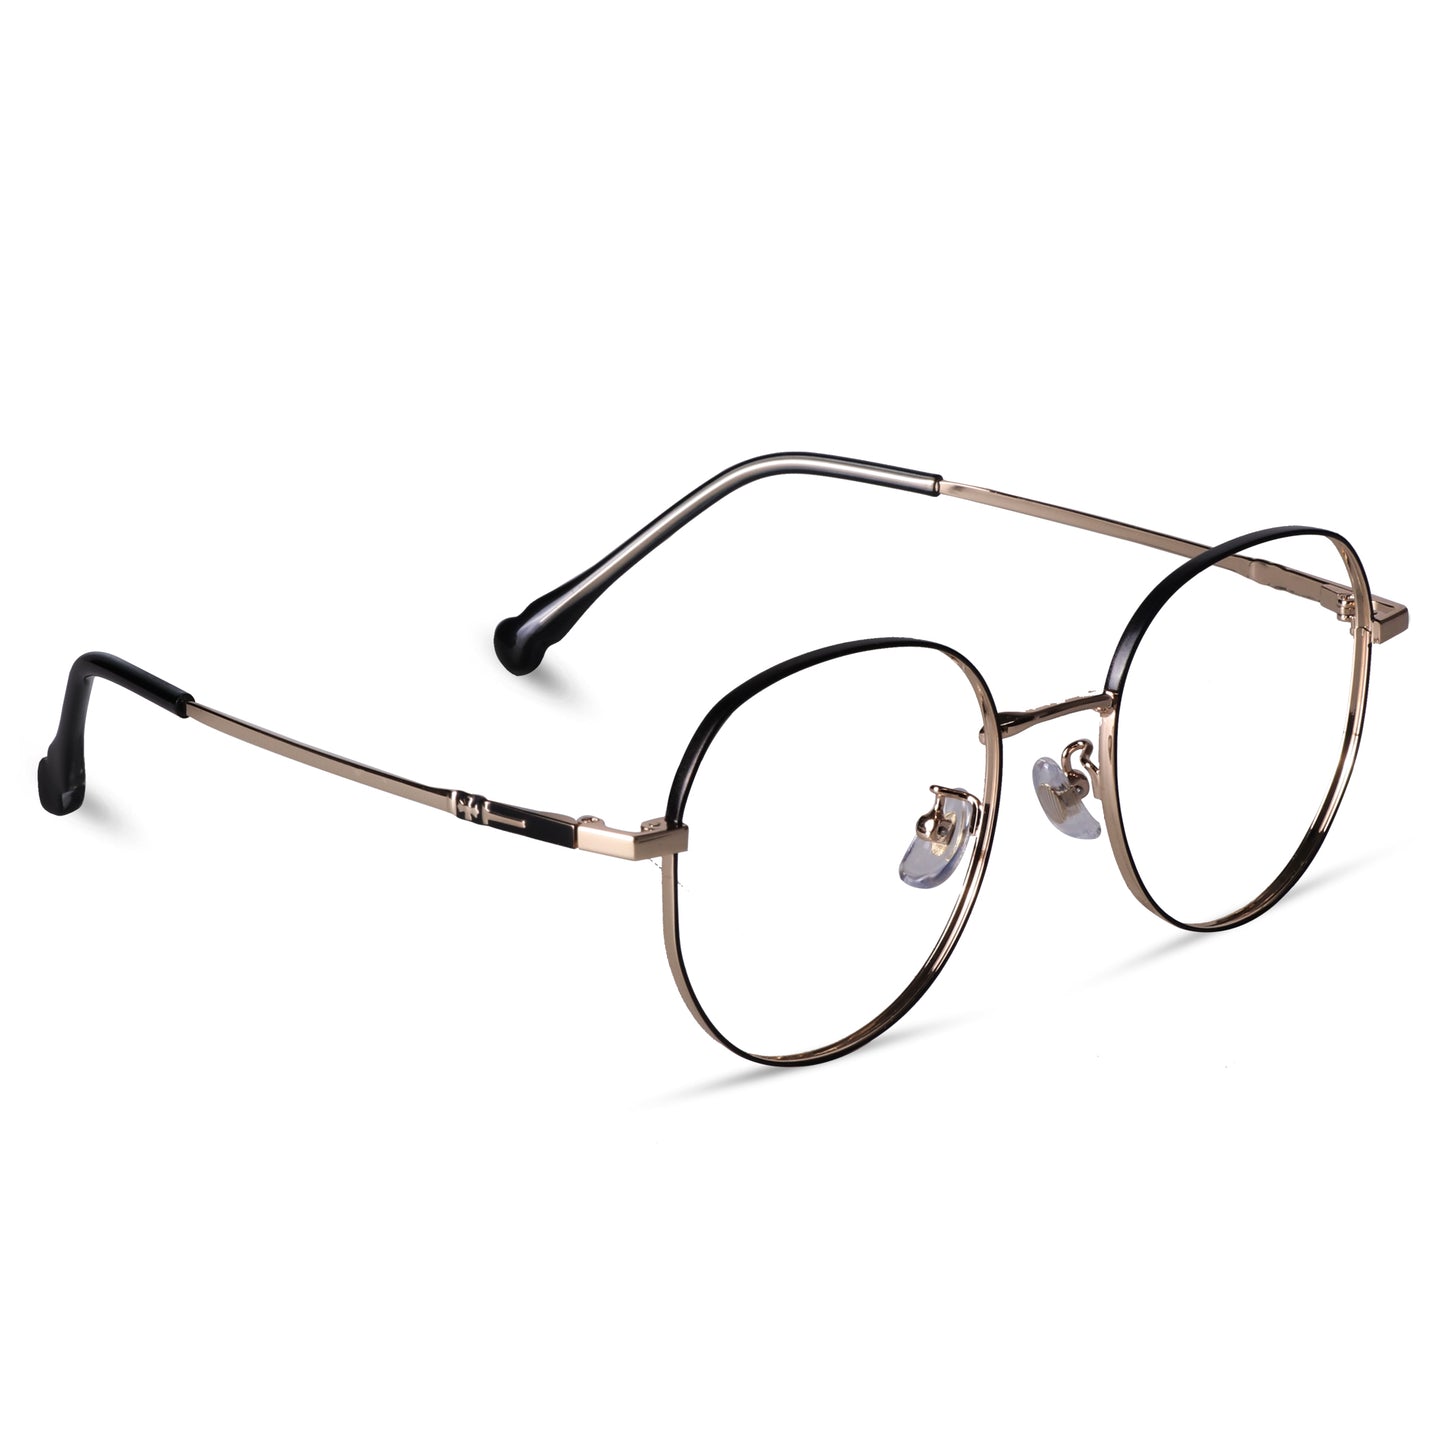 Sirts Pink Round S1236 (Including Anti-Glare Lens)